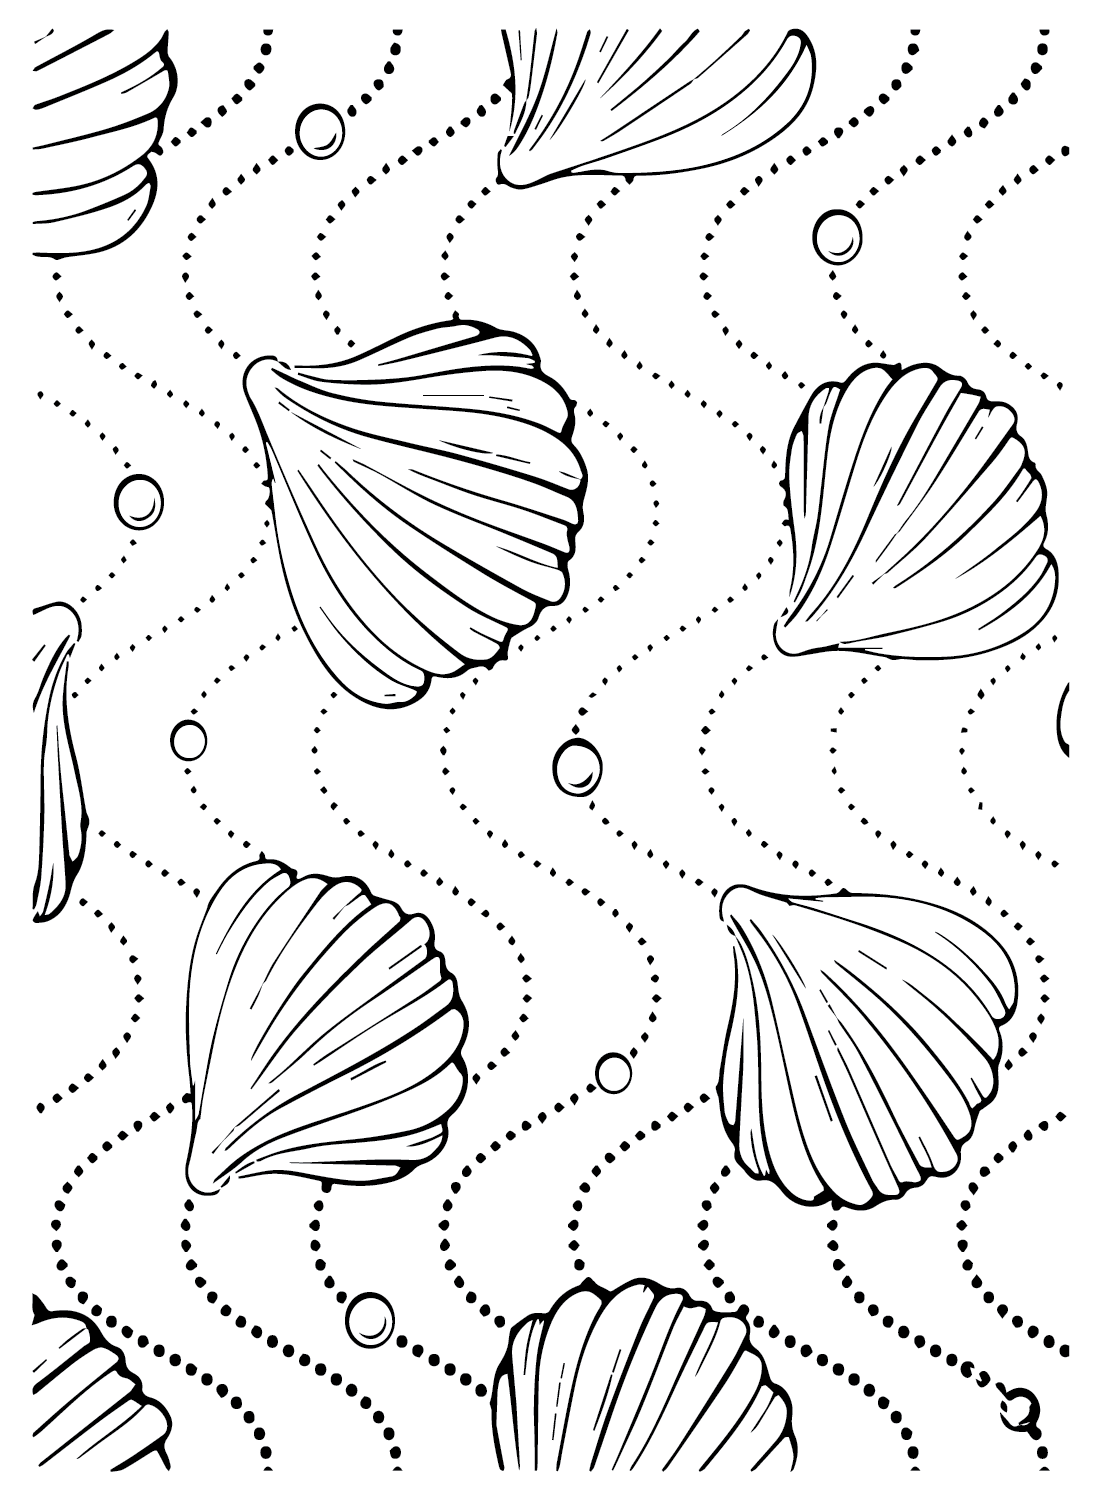 Image Background Cockle Coloring Pages